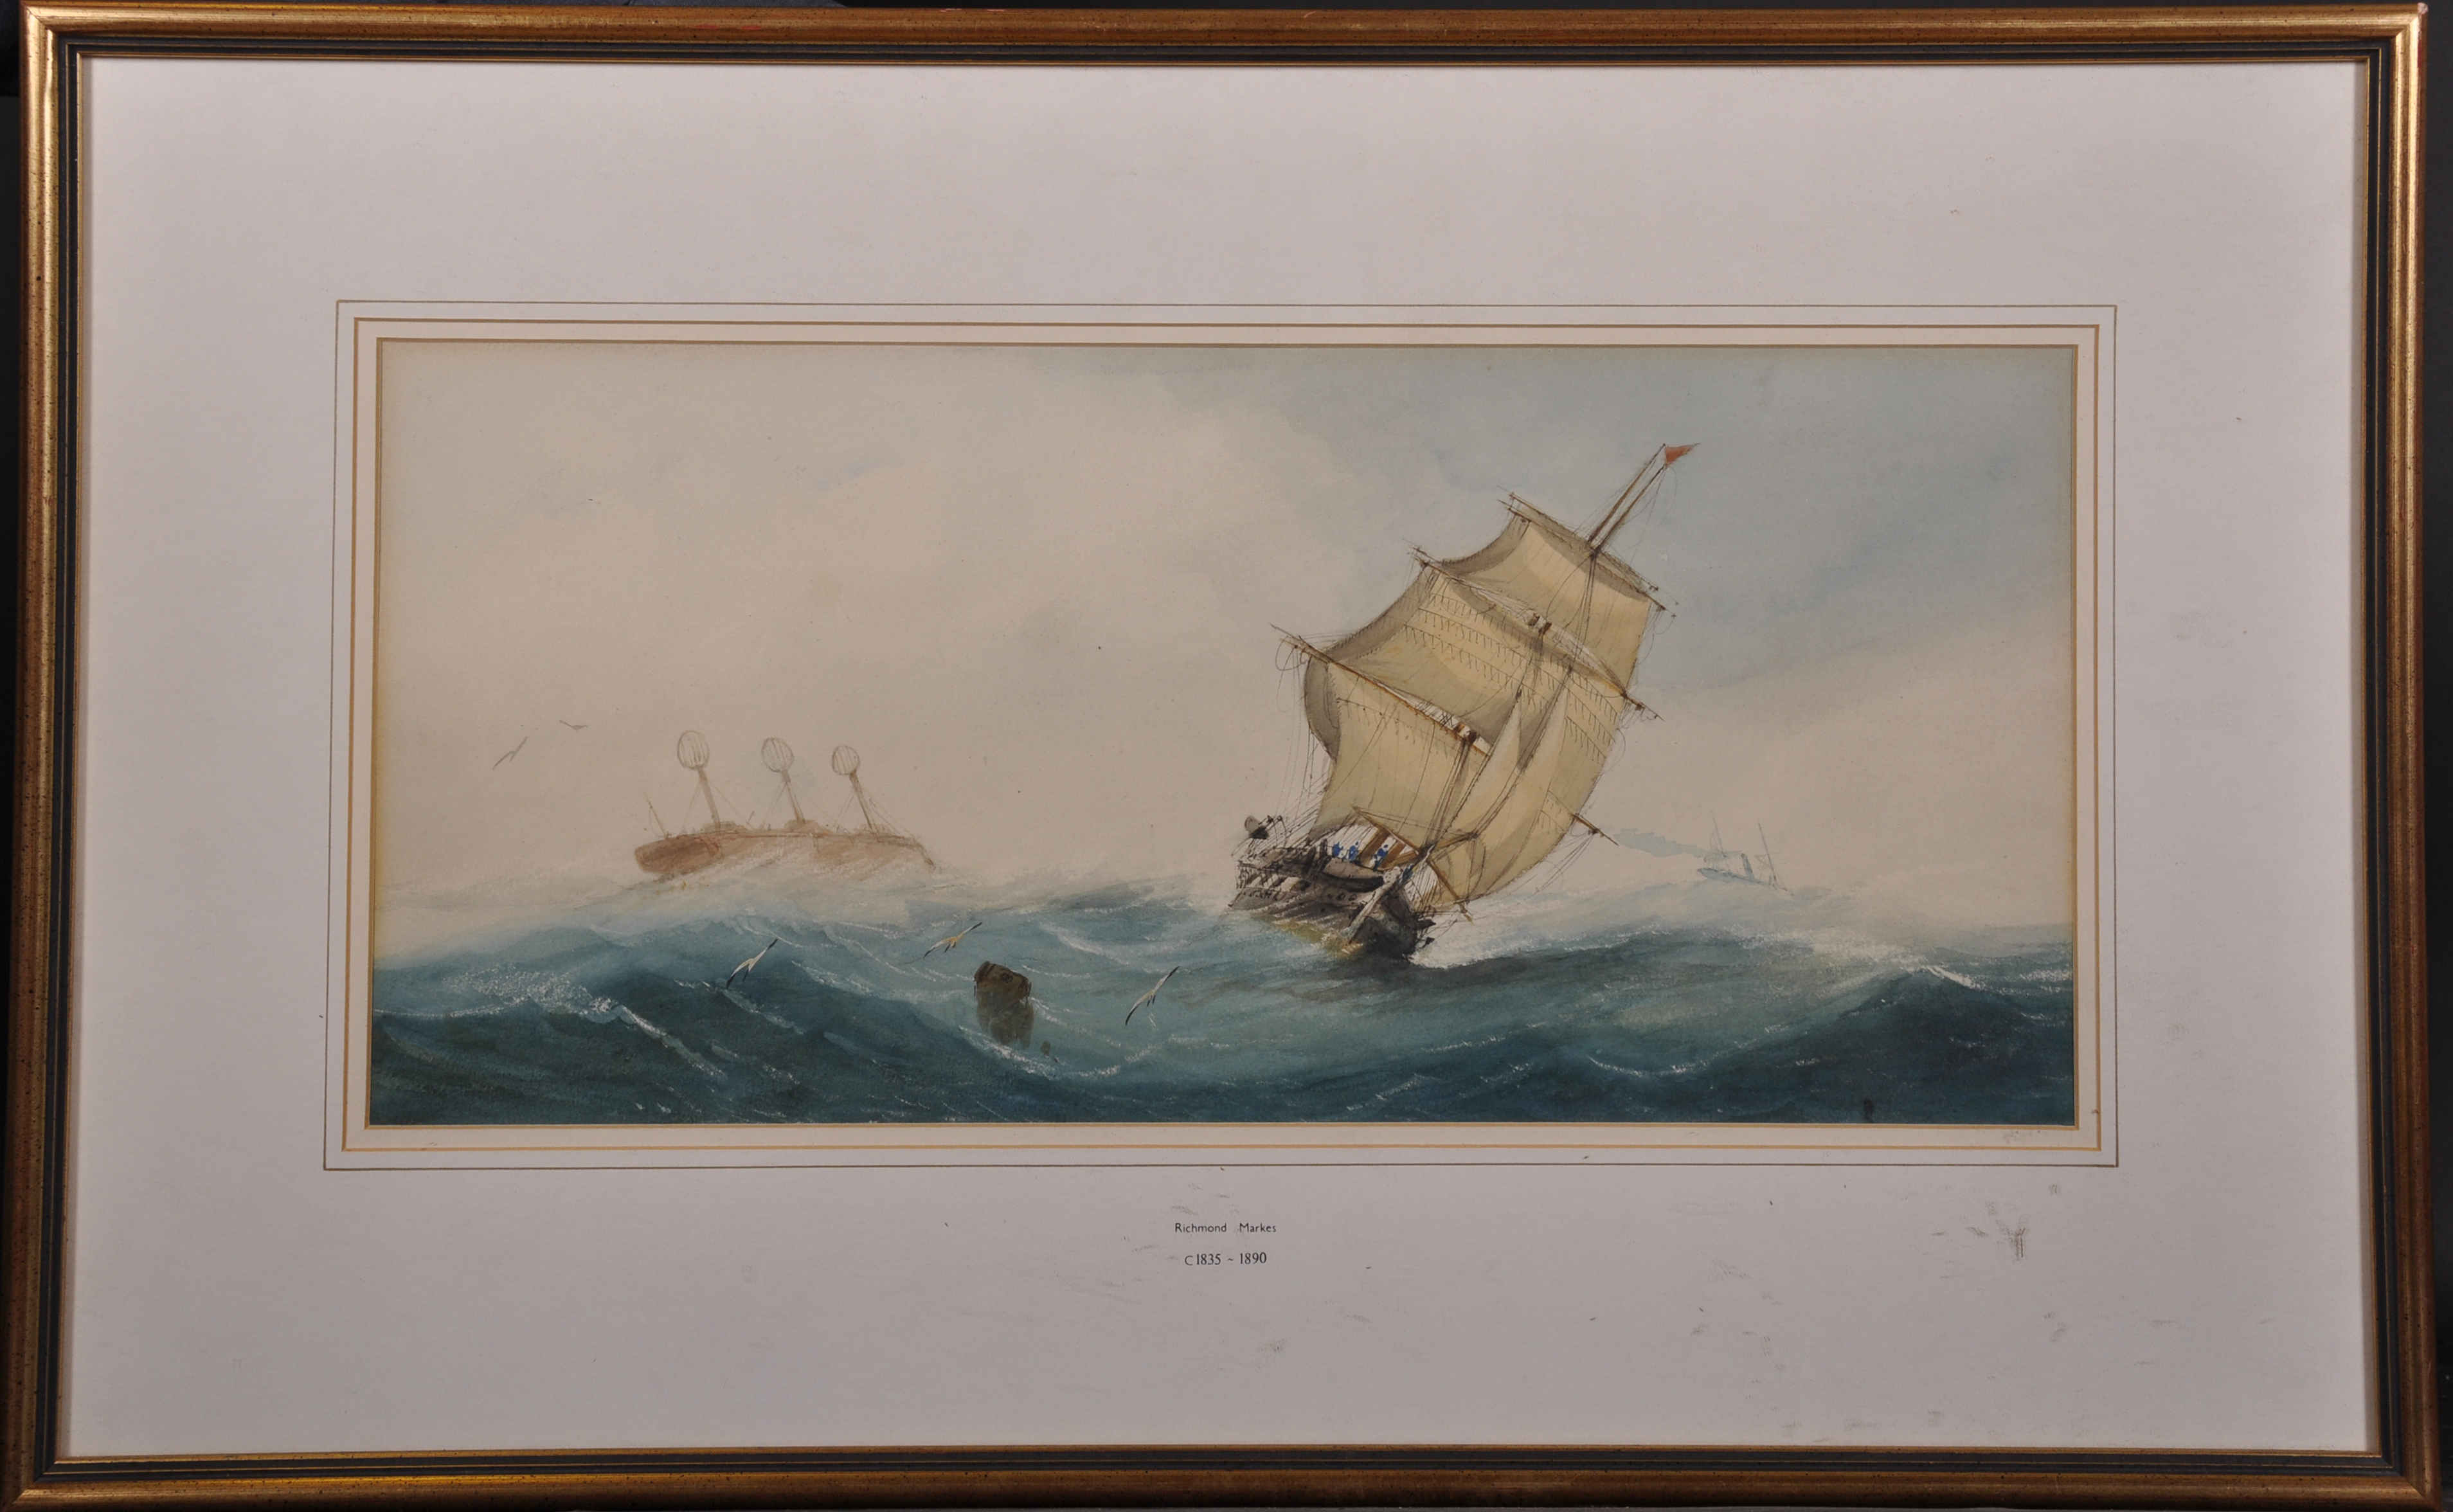 Richmond Markes (act.1890-1920) British Shipping in Choppy Waters Watercolour 9.5” x 20.25” (24 x - Image 2 of 3